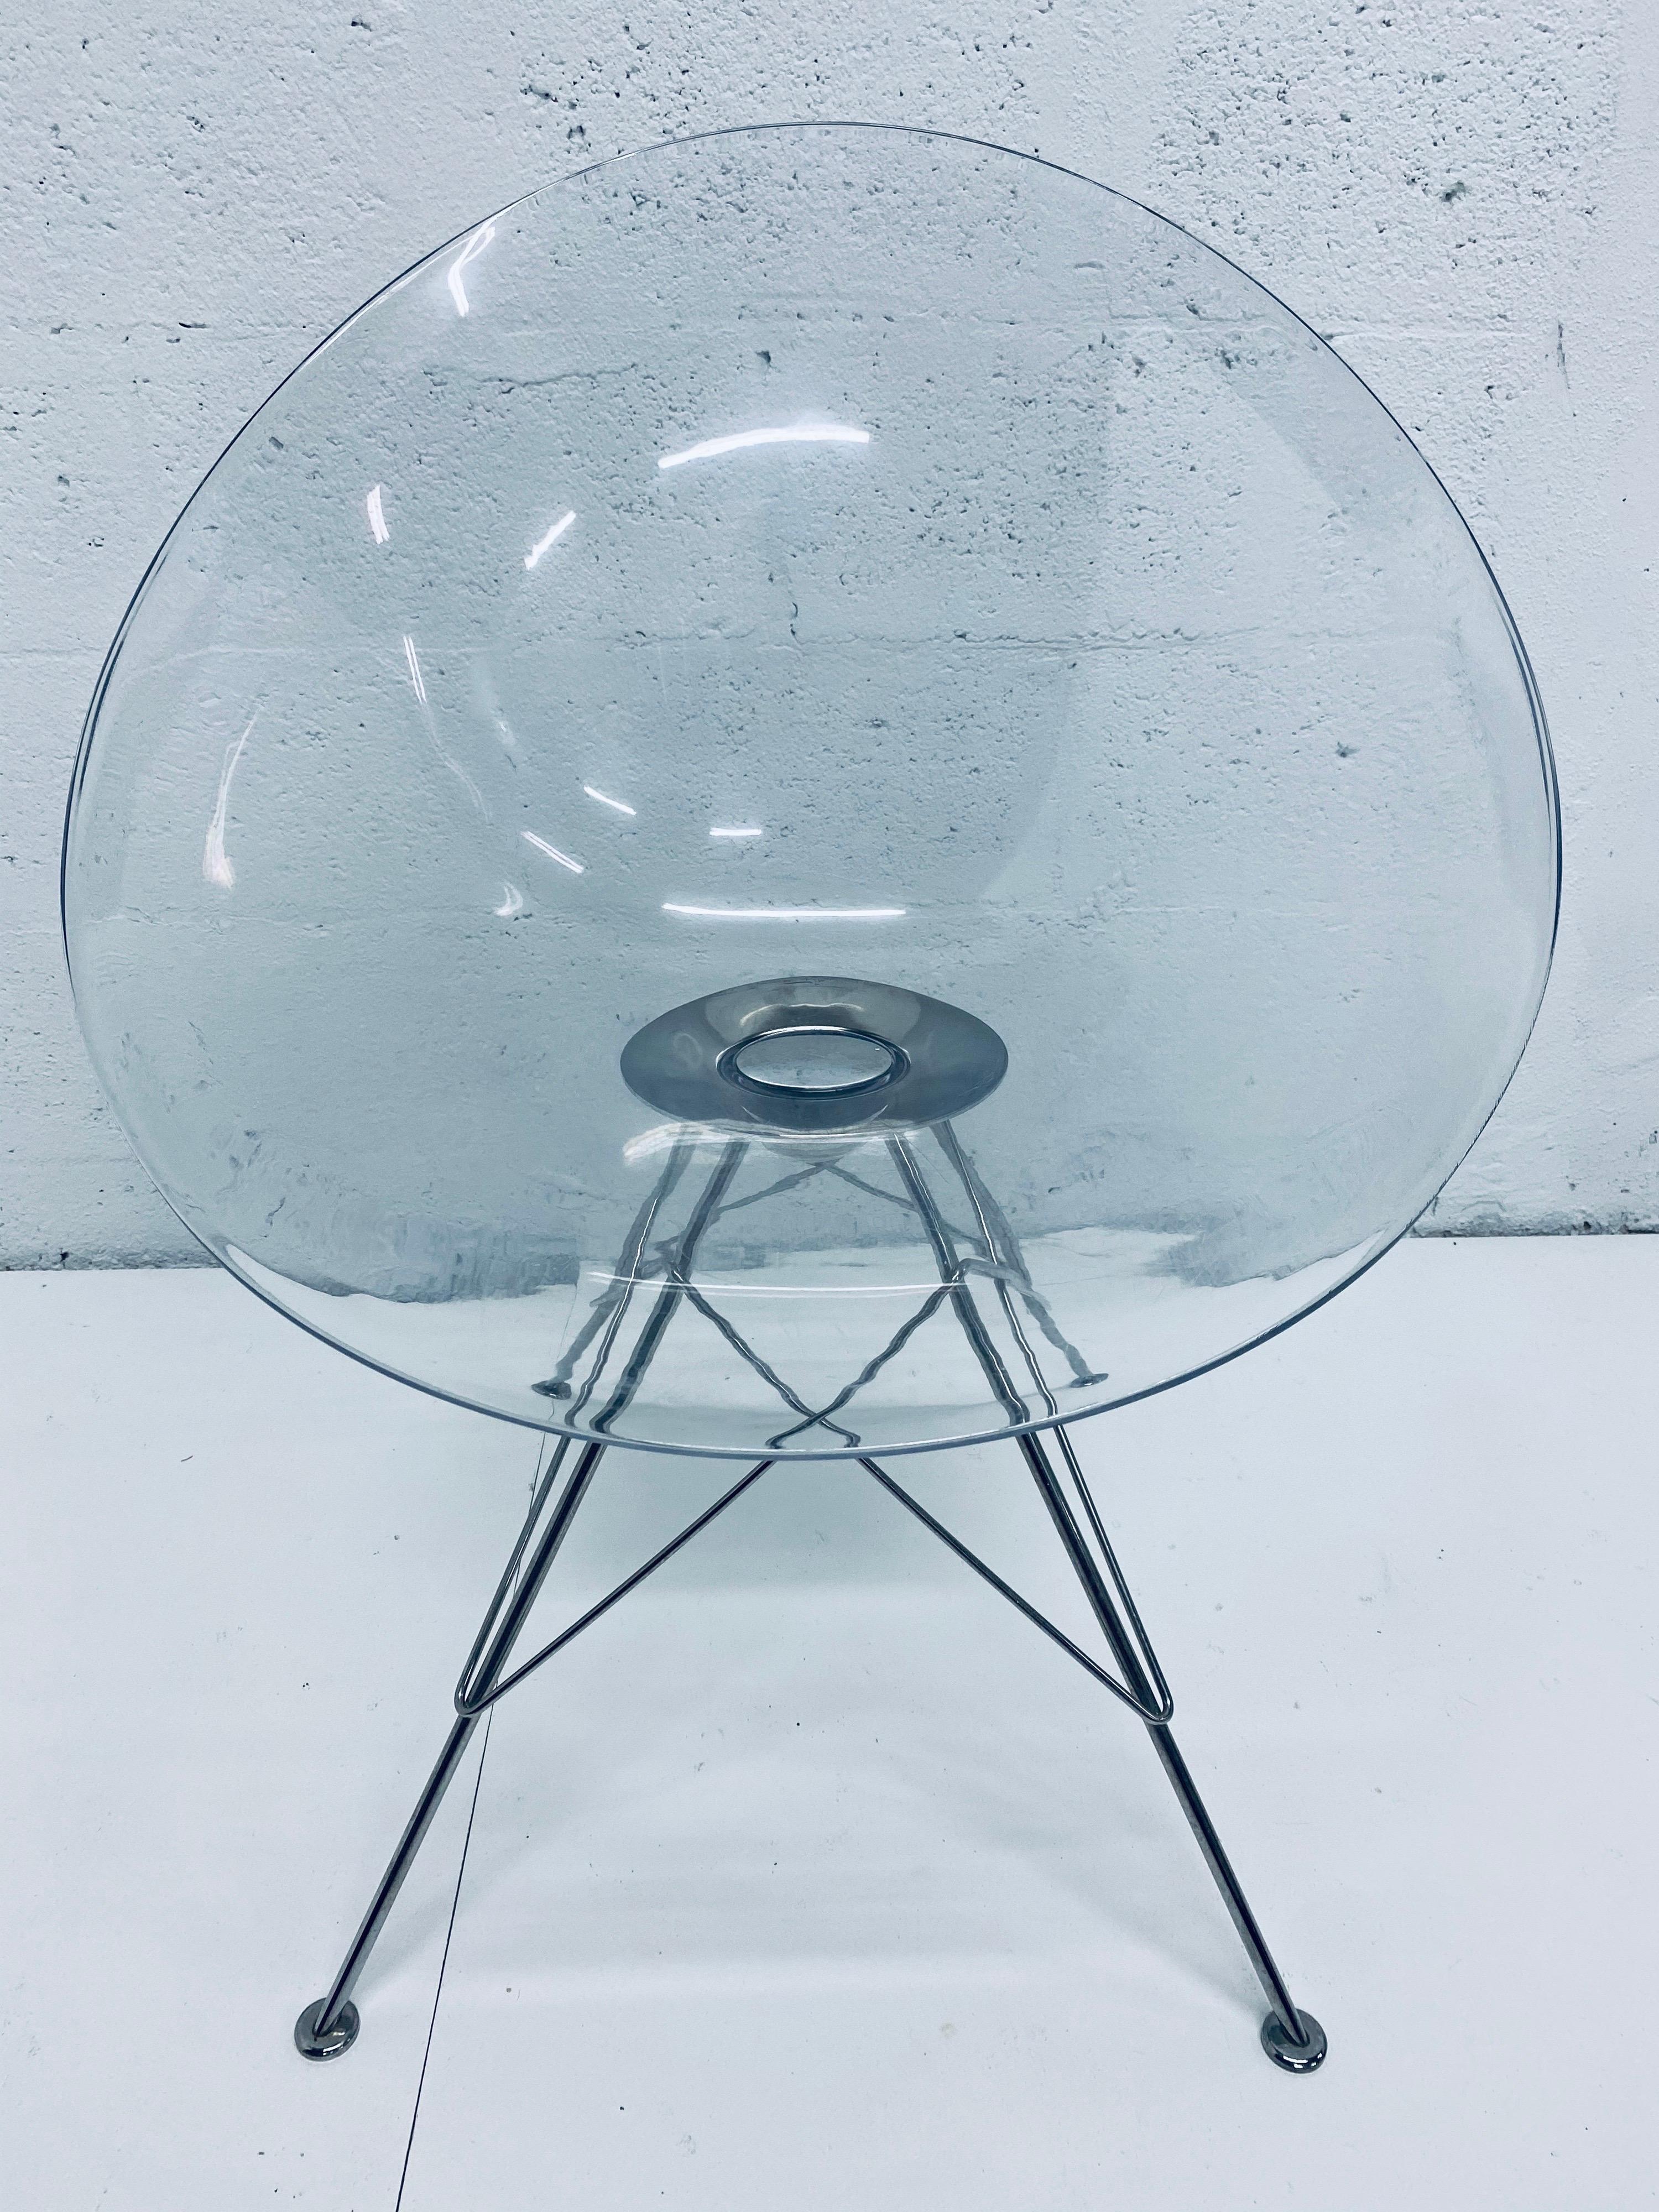 Set of two clear ghost Eros chairs with chrome Eiffel Tower base designed by Philippe Starck for Kartell.